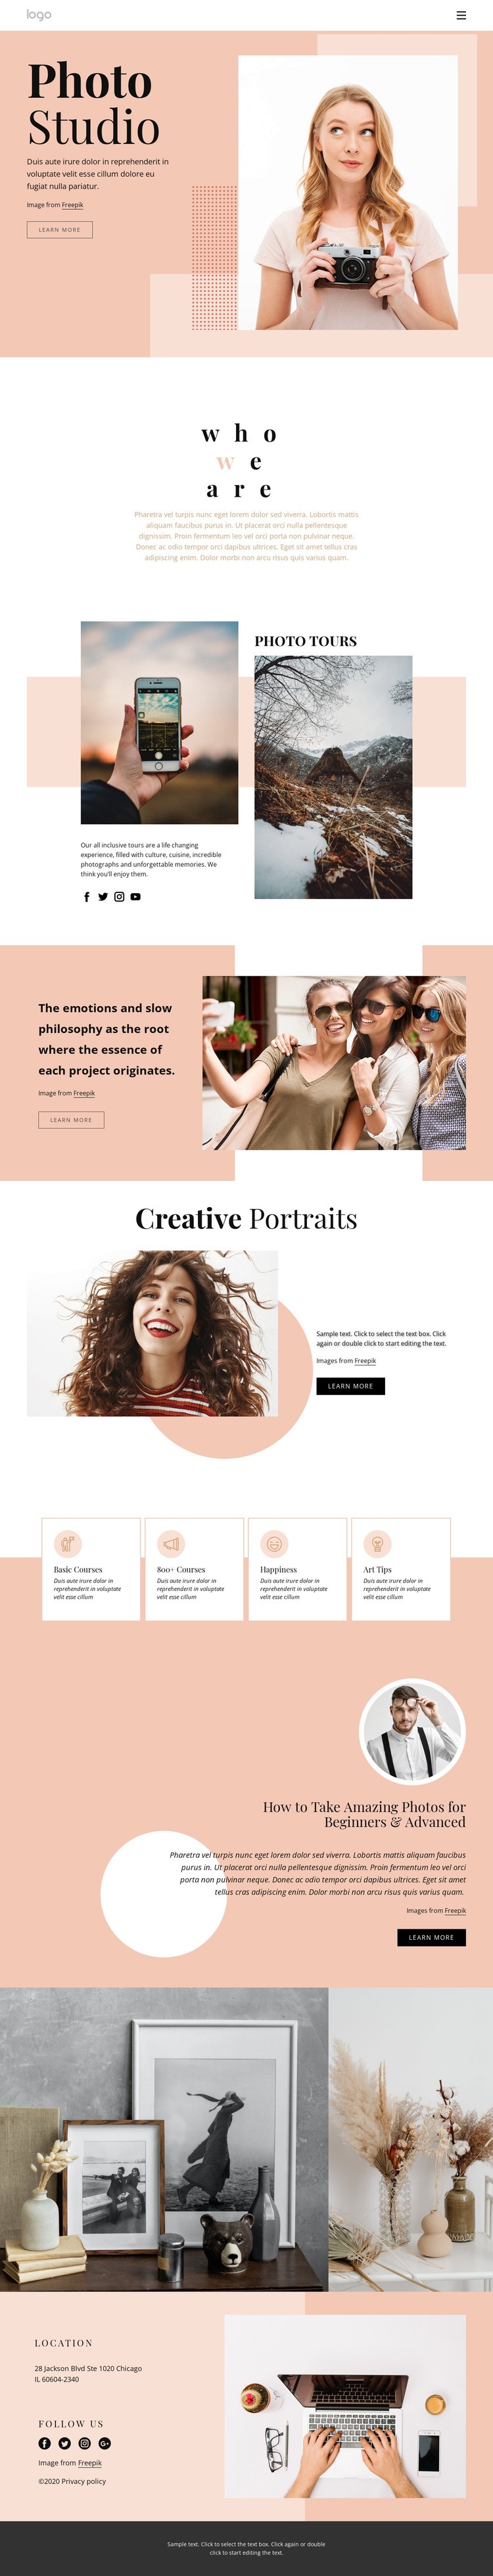 Photography courses Homepage Design